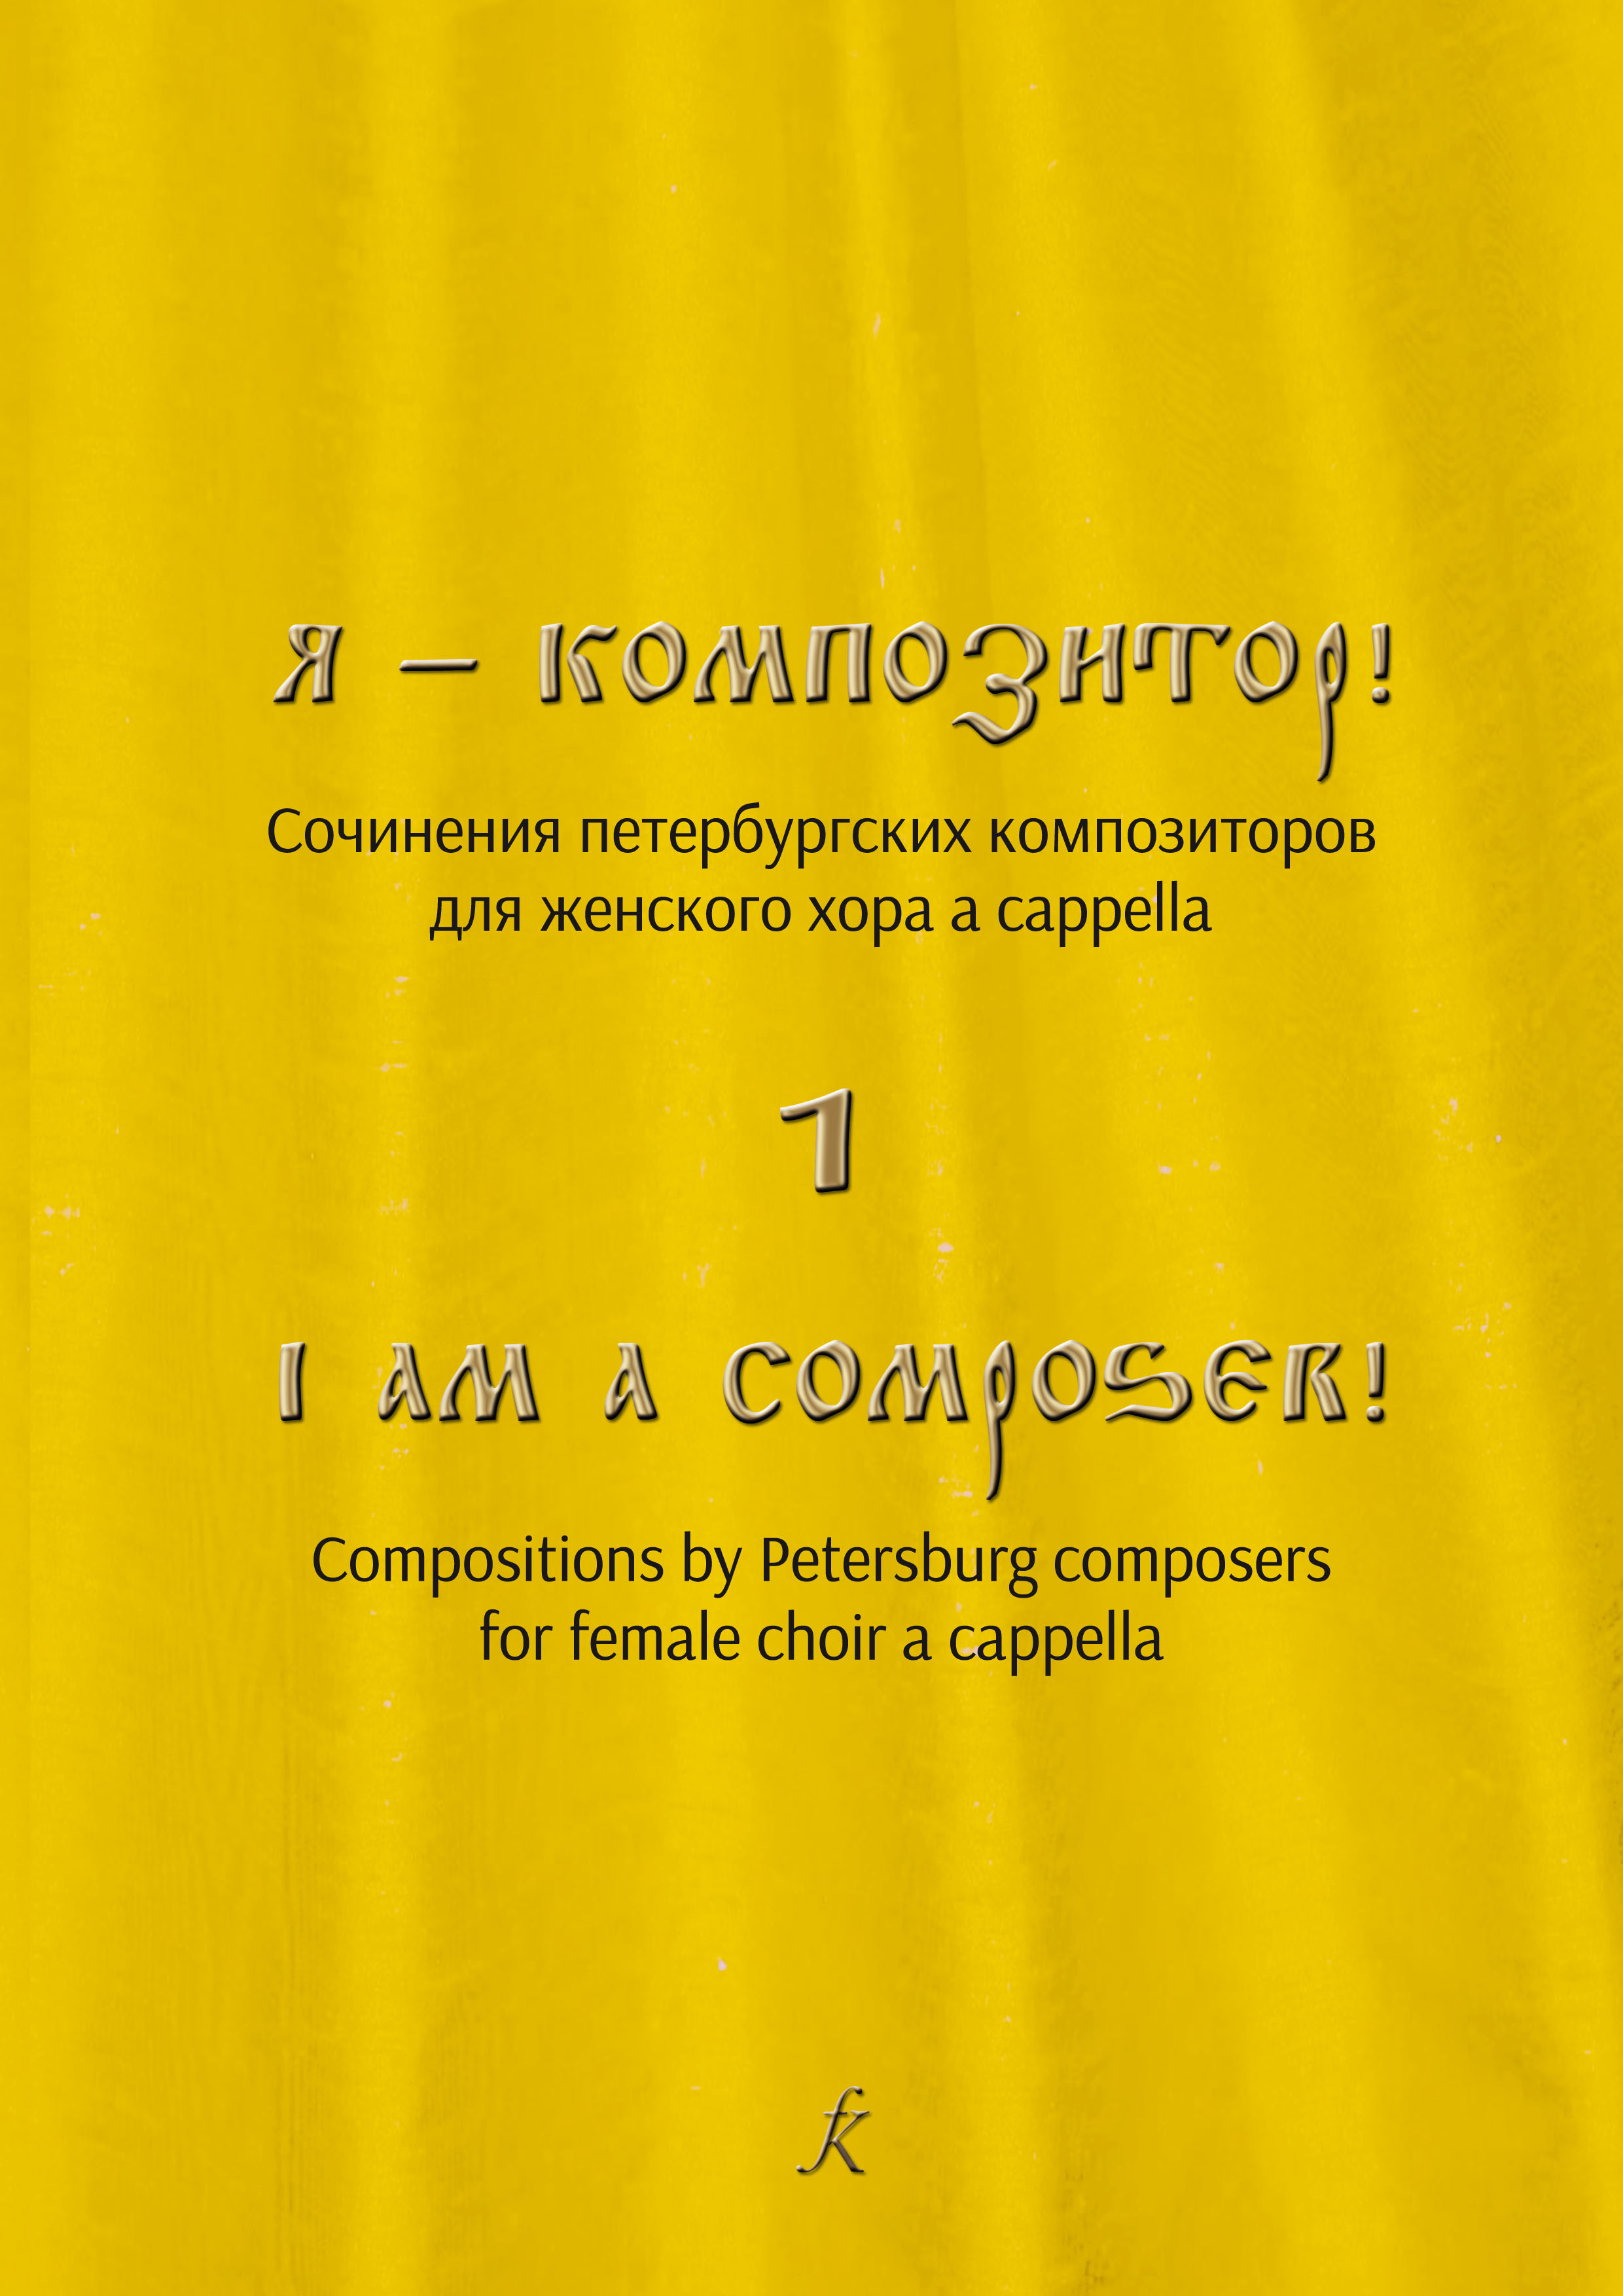 Yekimov S. I am a Composer! Pieces by Petersburg composers for female choir a cappella. Vol. 1